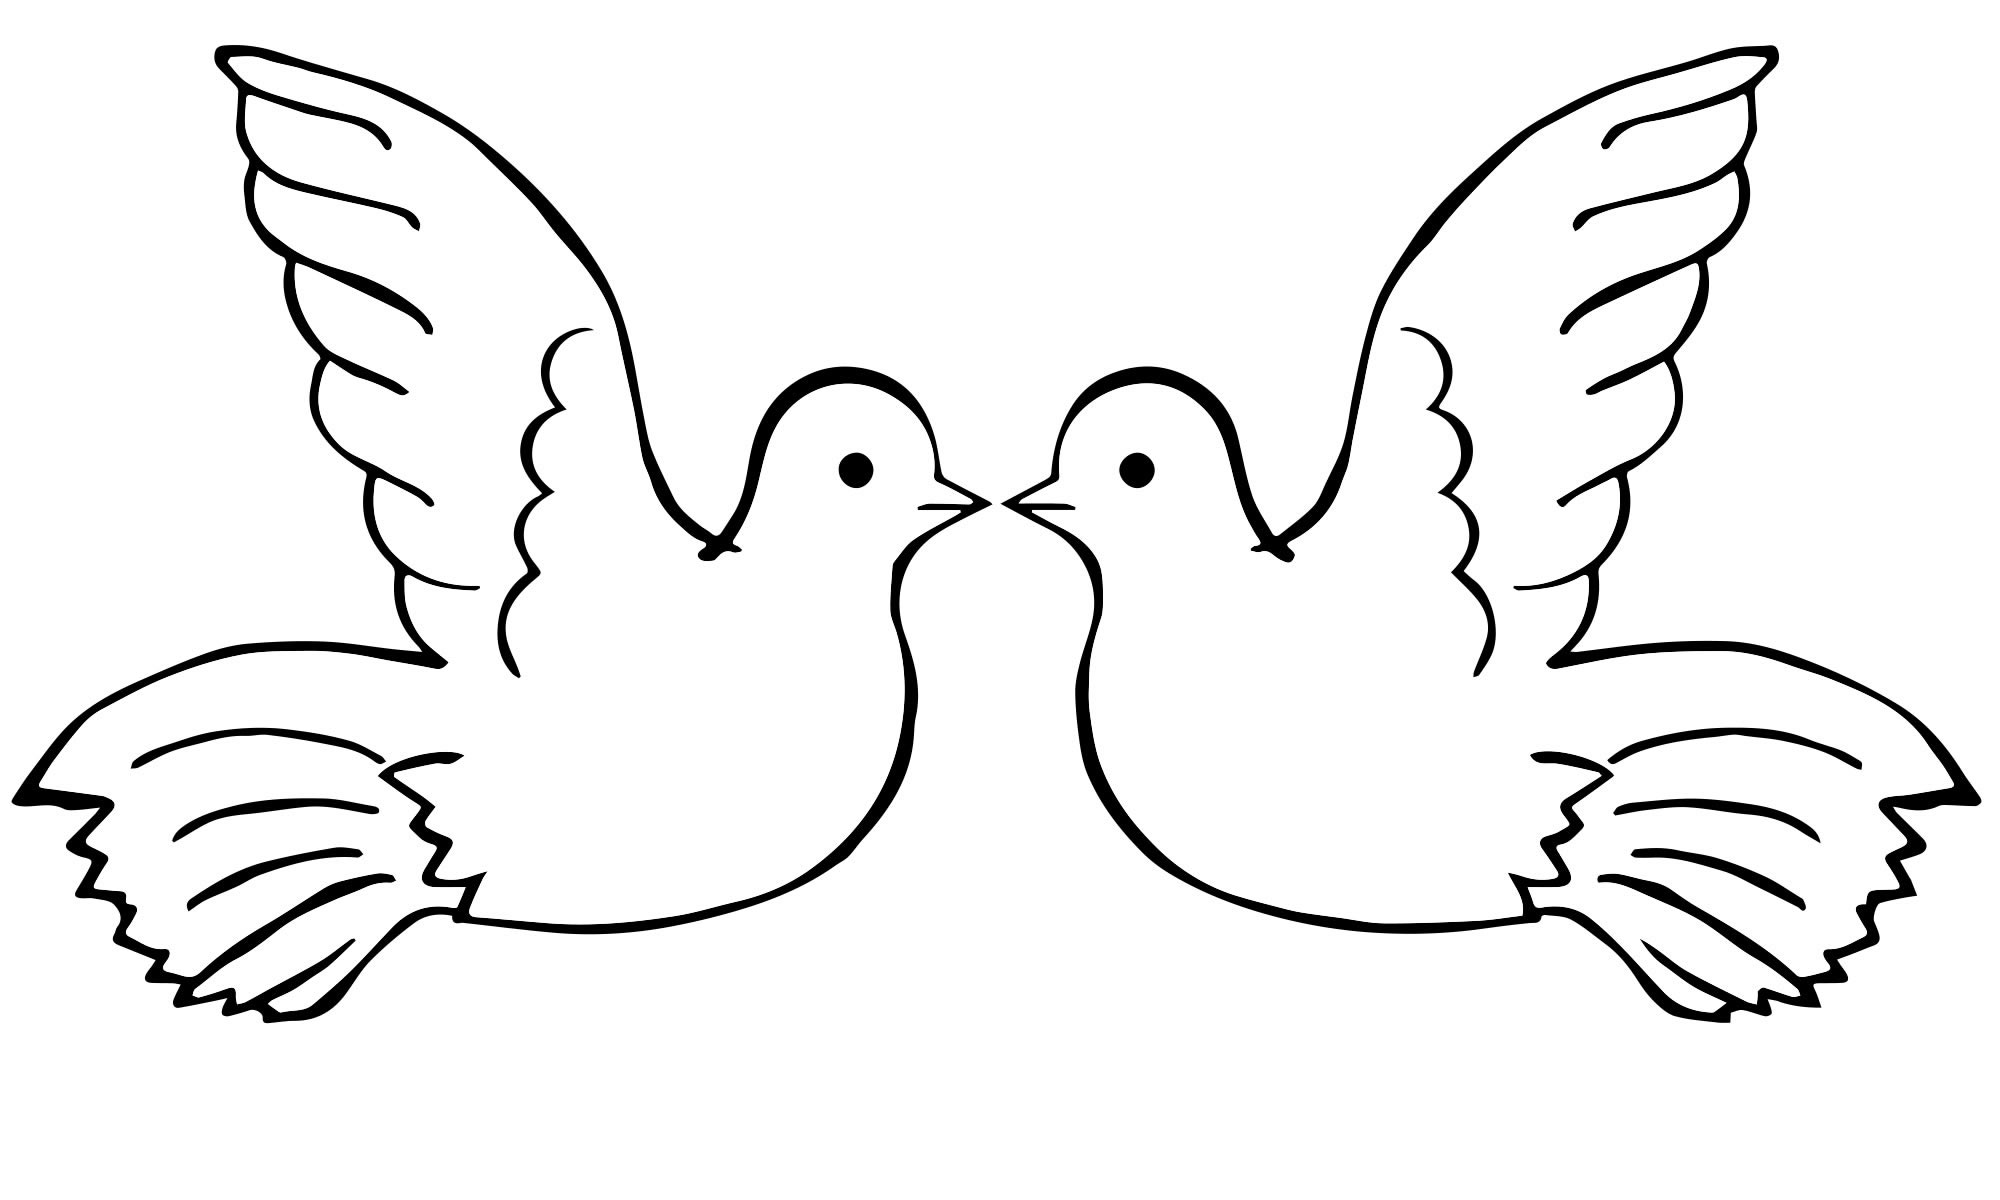 Coloring page of a spectacular white dove